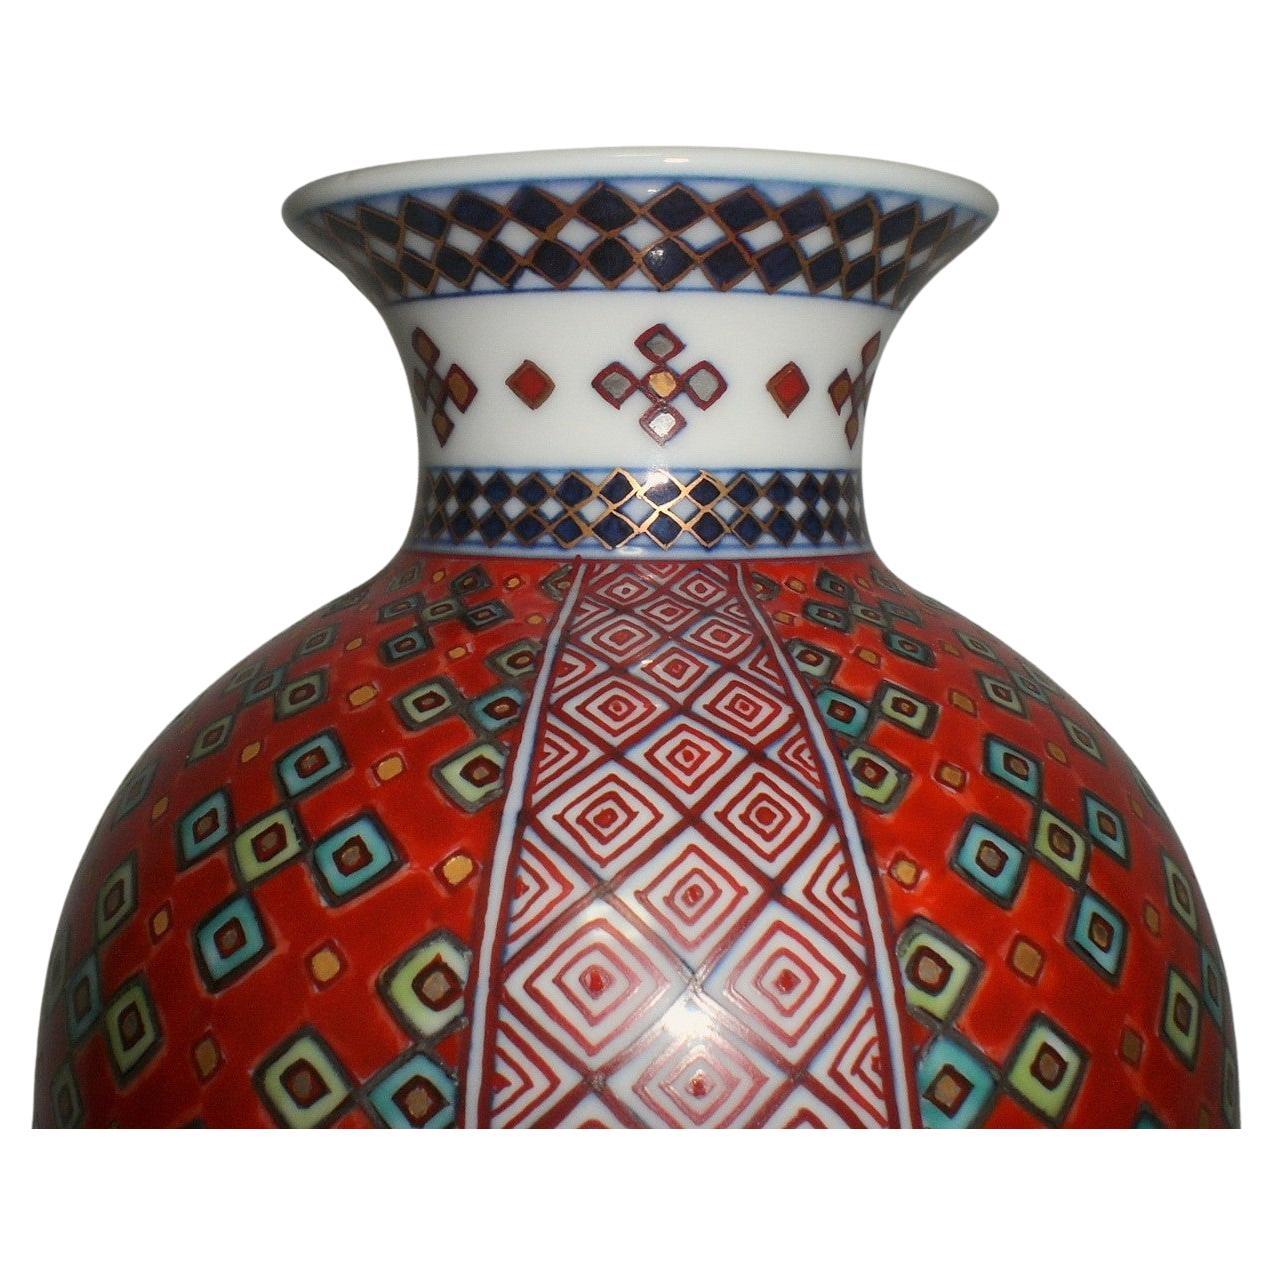 Hand-Crafted Contemporary Japanese Gilded Red Blue Porcelain Vase by Master Artist For Sale